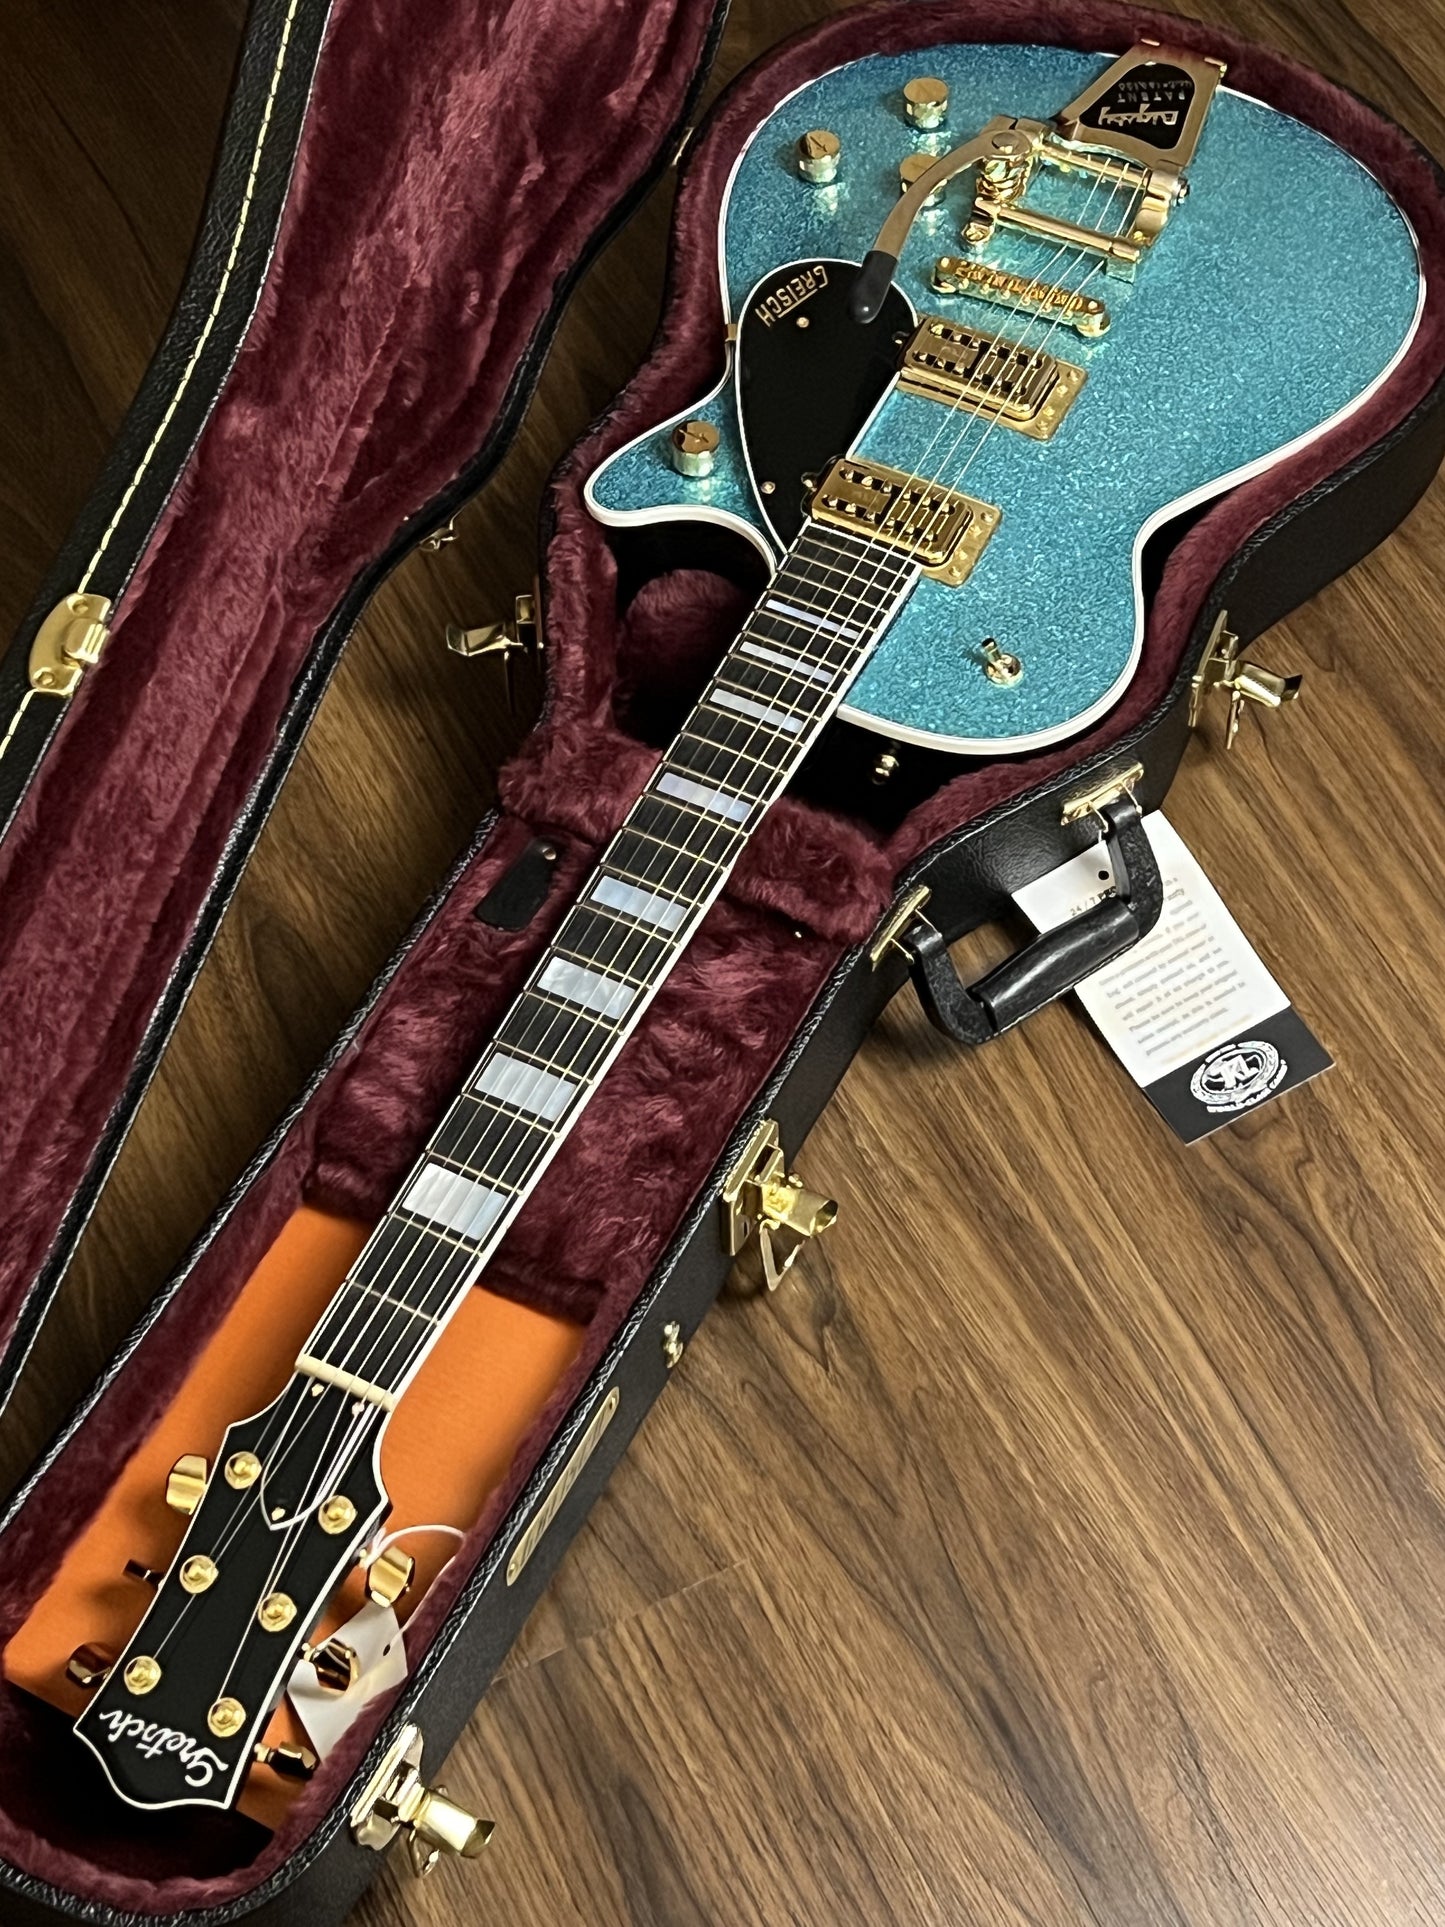 Gretsch Ltd Ed G6229TG Players Edition Sparkle Jet w/ Bigsby in Ocean Turquoise Sparkle